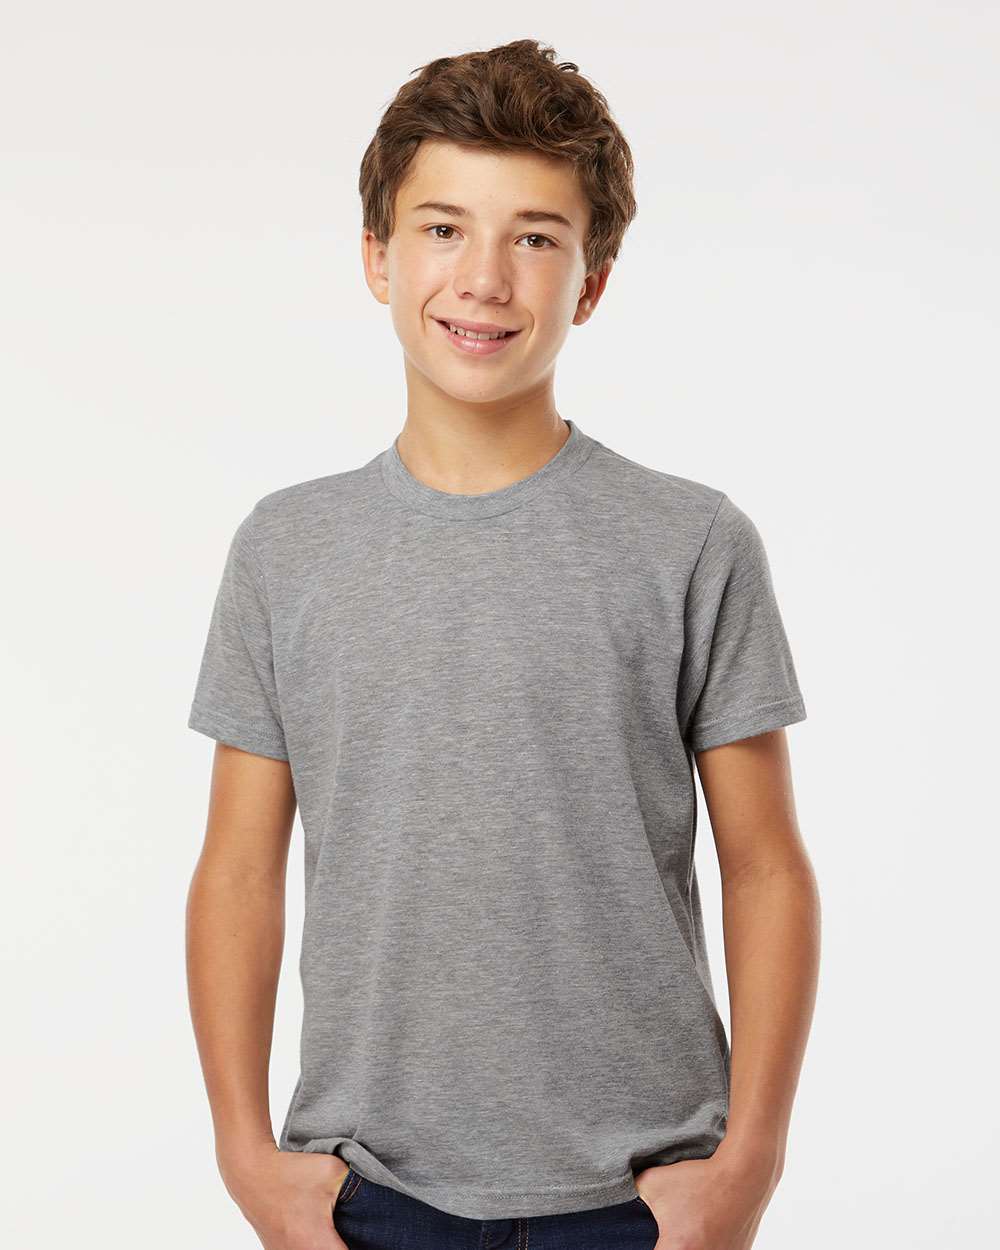 Youth Deluxe T-Shirt